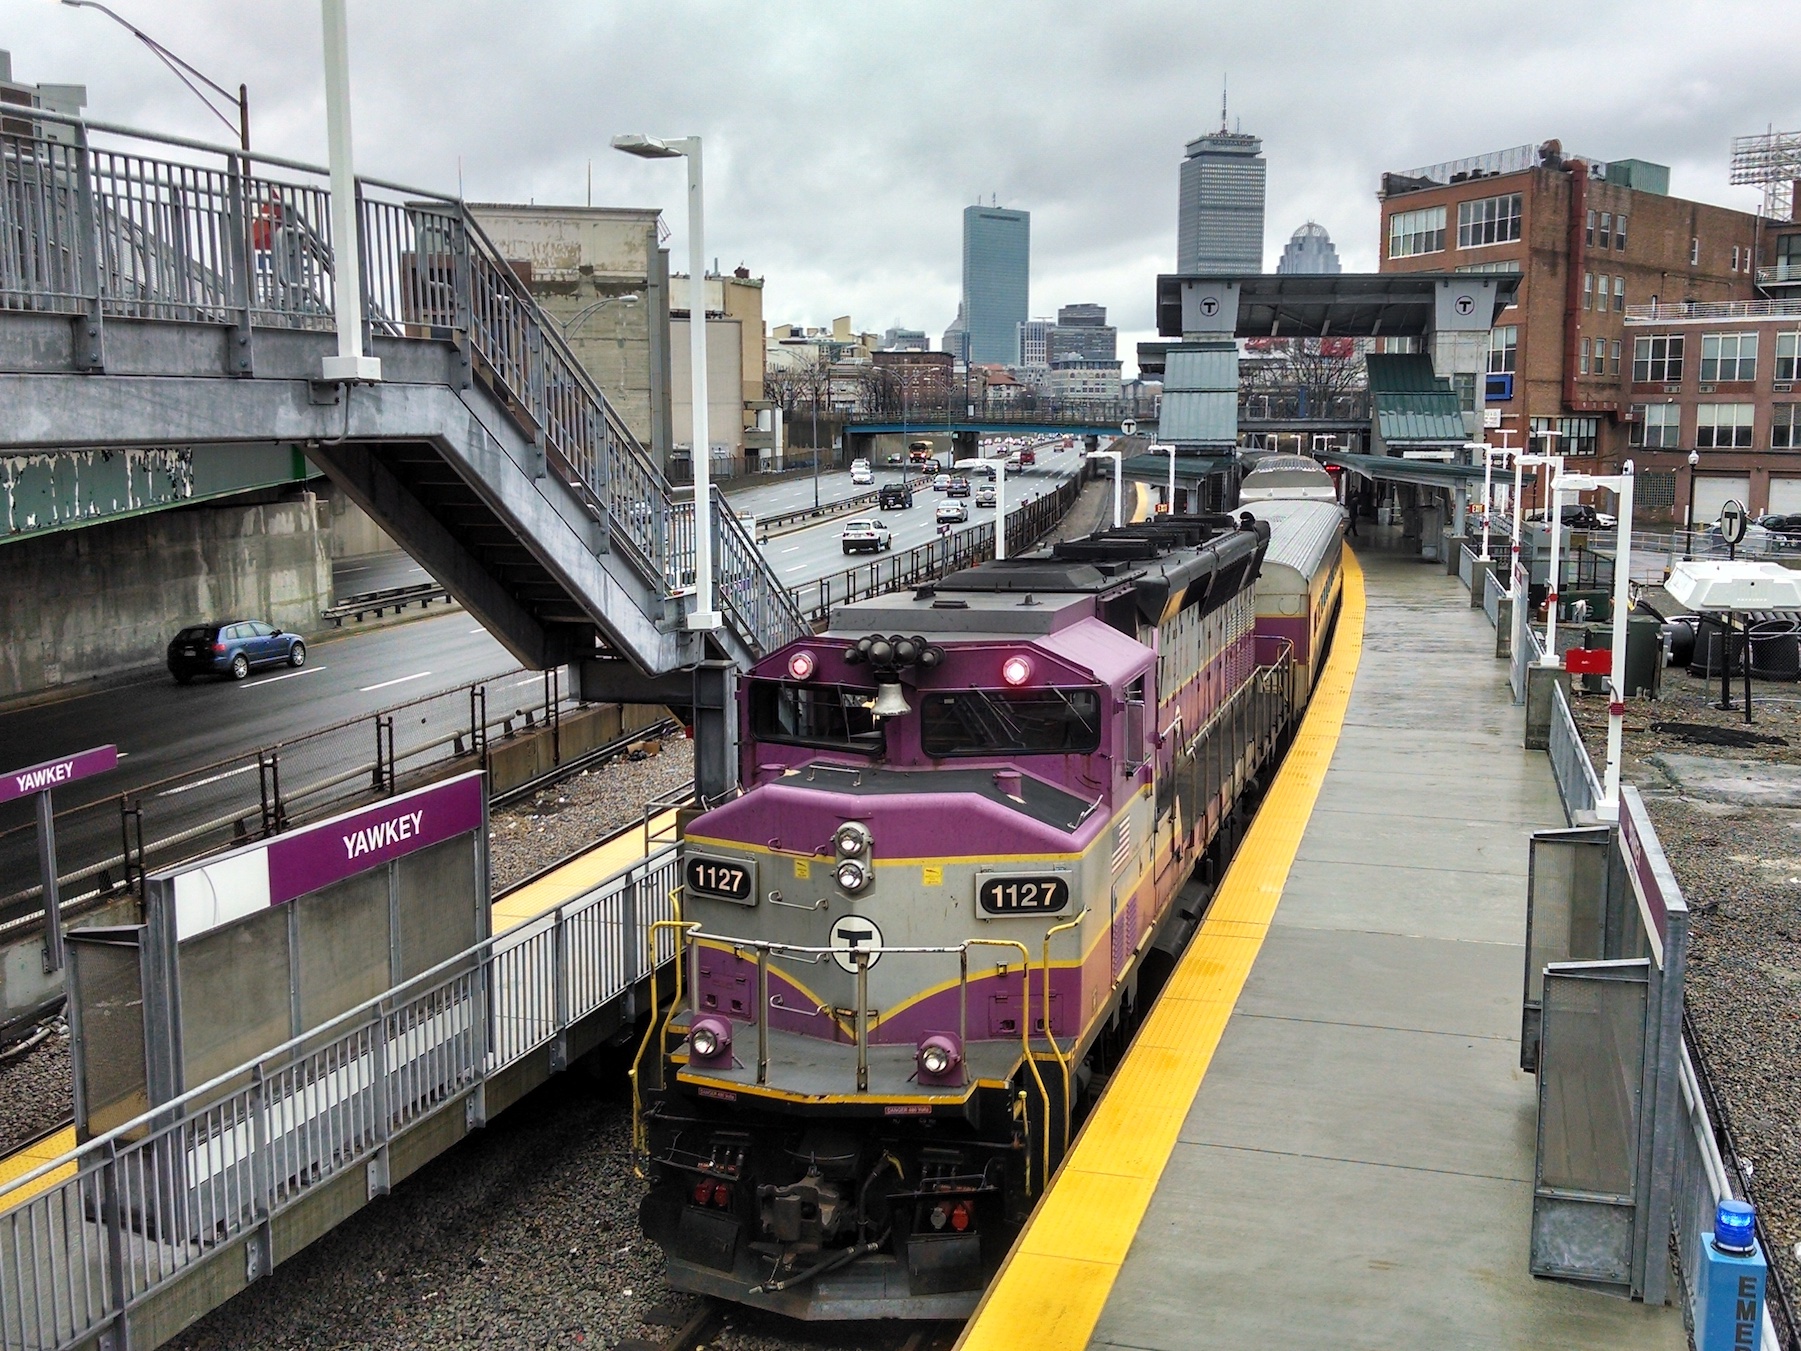 The MBTA is renaming Yawkey Station after another nearby street